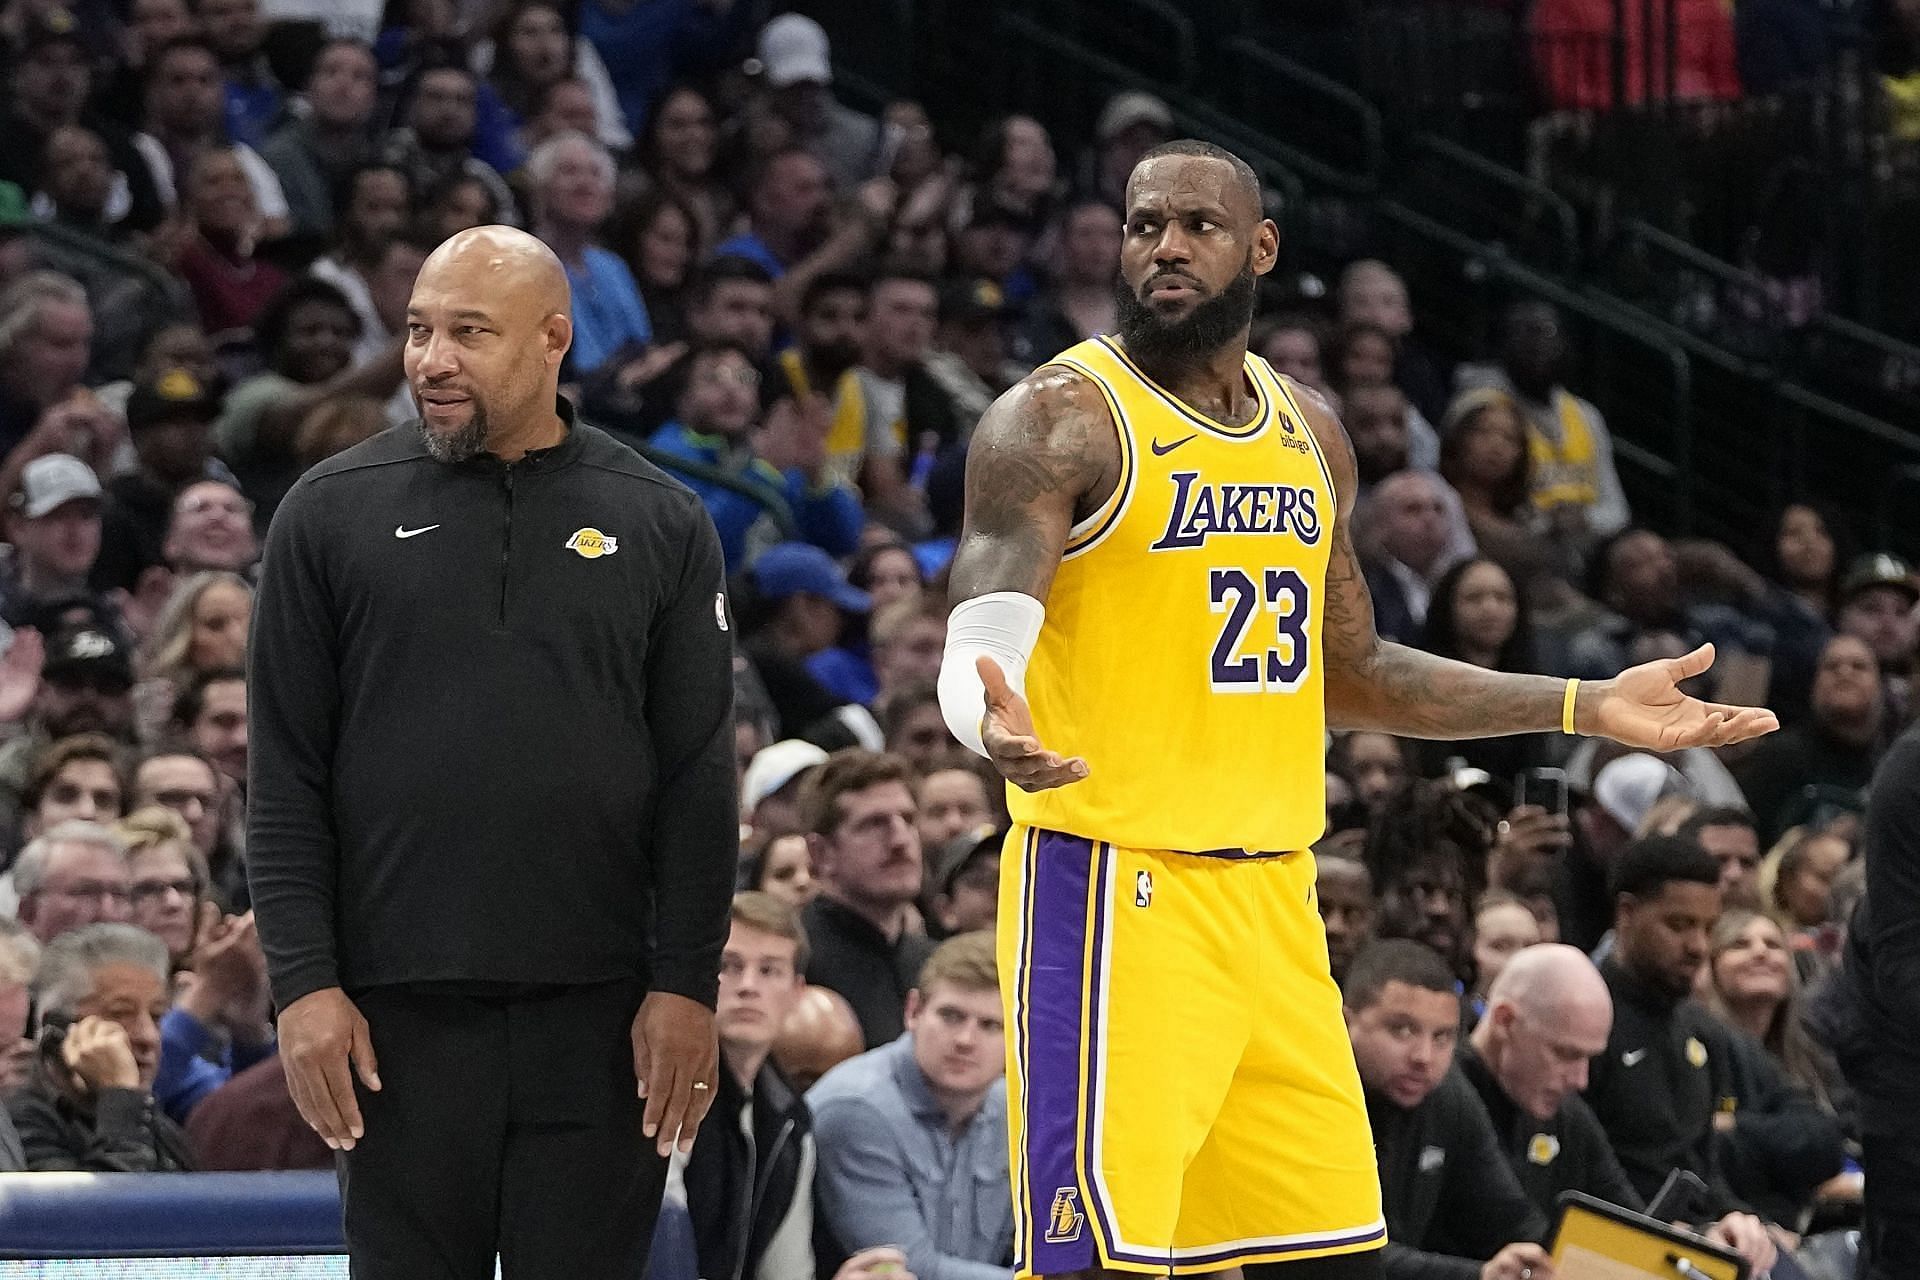 Lakers fans decimate LeBron James for shooting 35% in shambolic Christmas Day loss to Celtics 